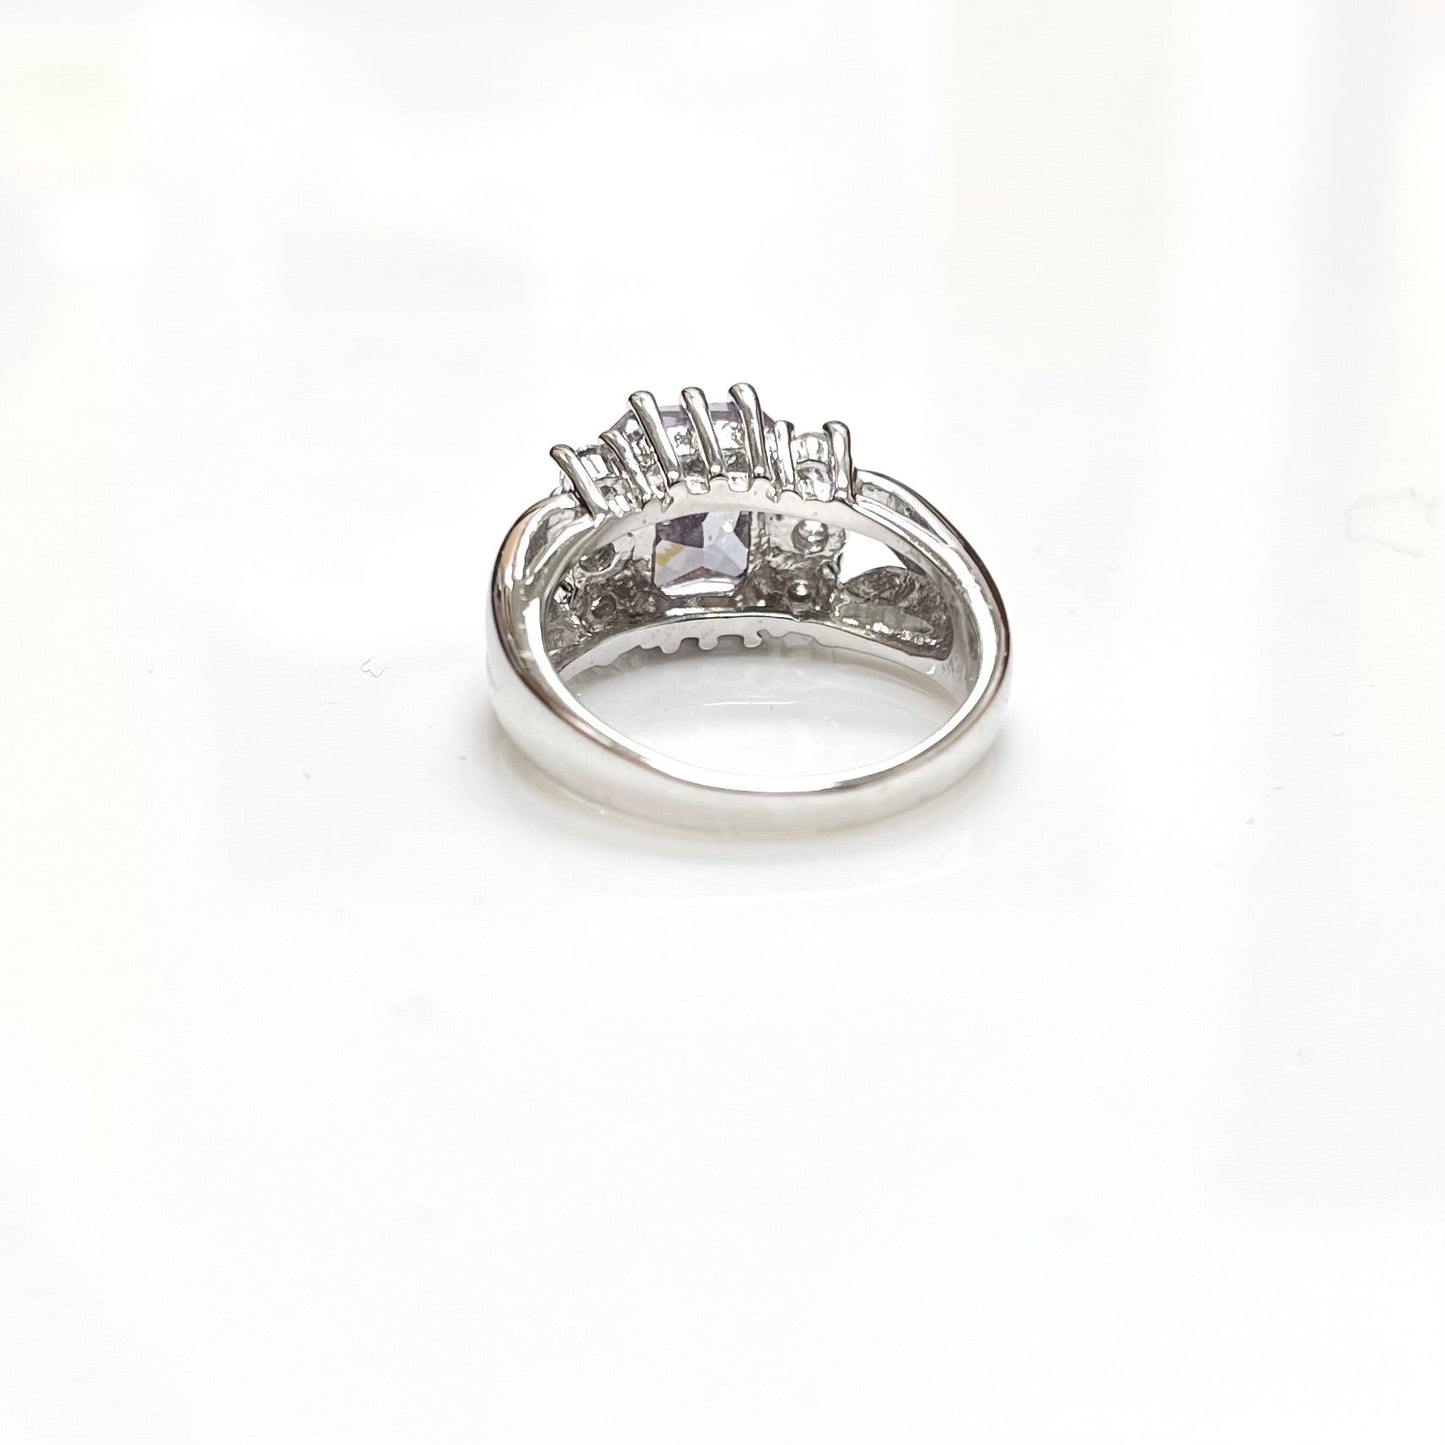 Ring Statement By Pdi  Size: 7